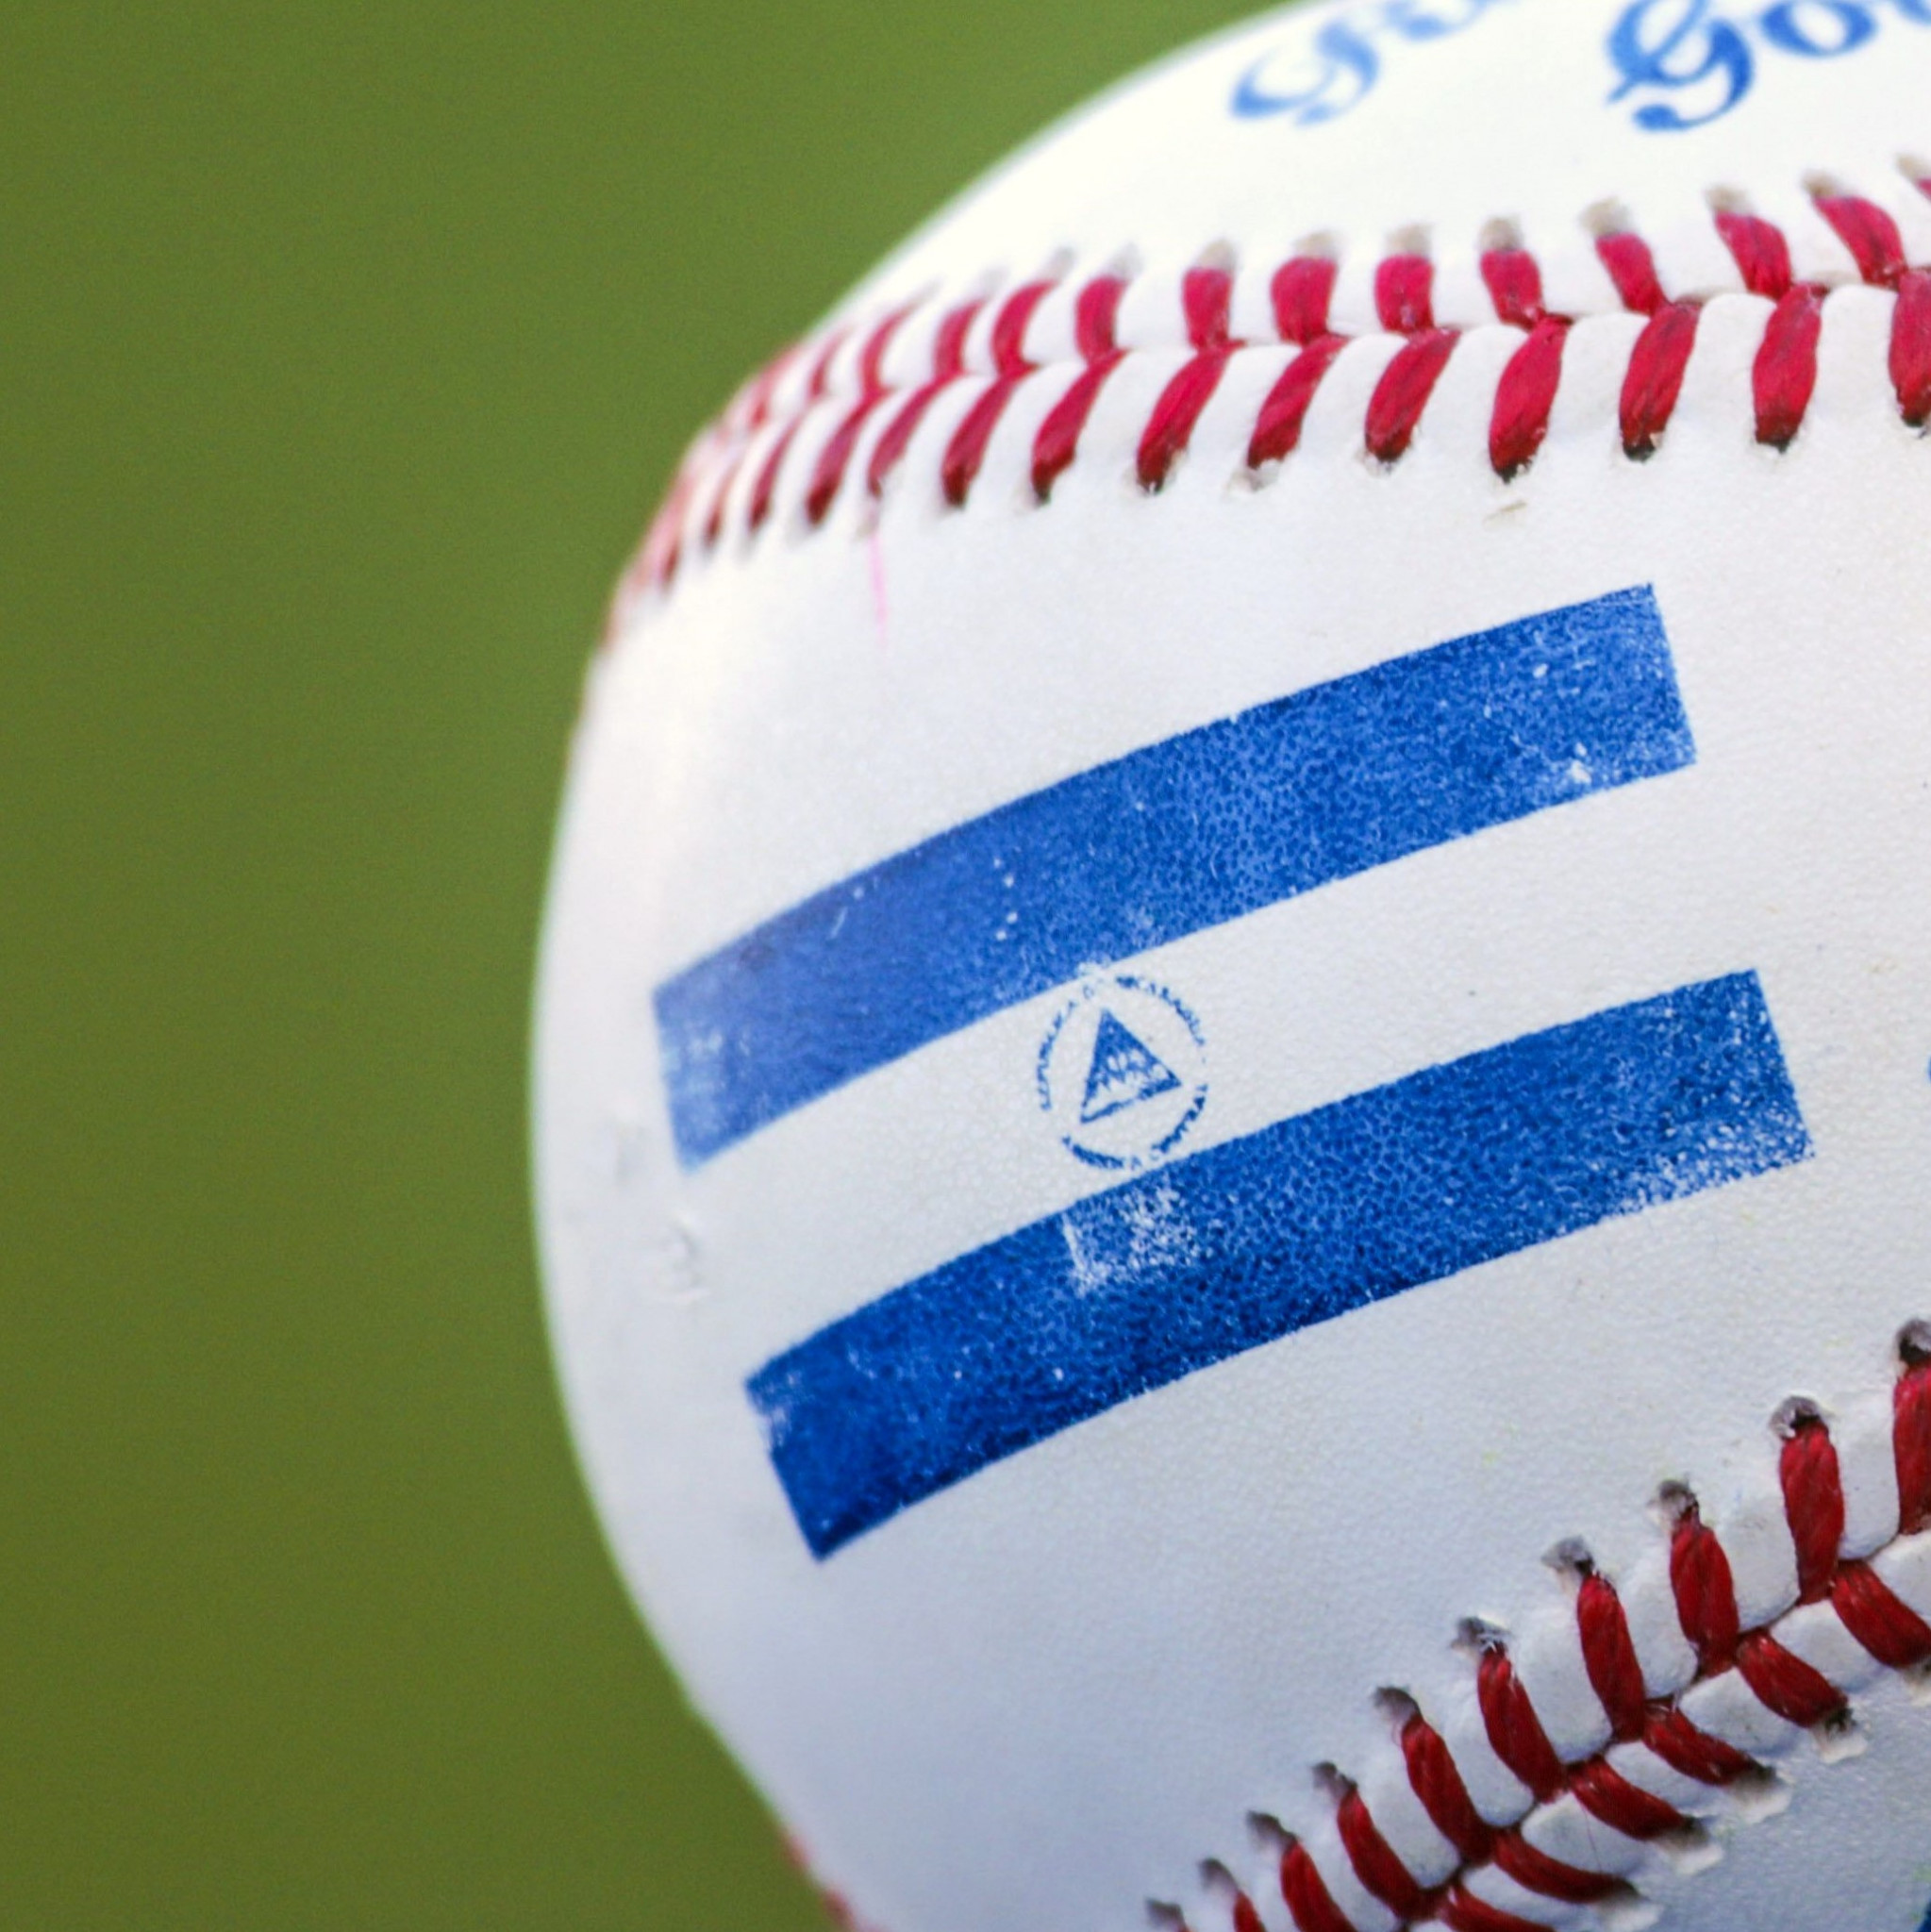 Nicaragua have qualified for the World Baseball Classic for the first time ©Getty Images